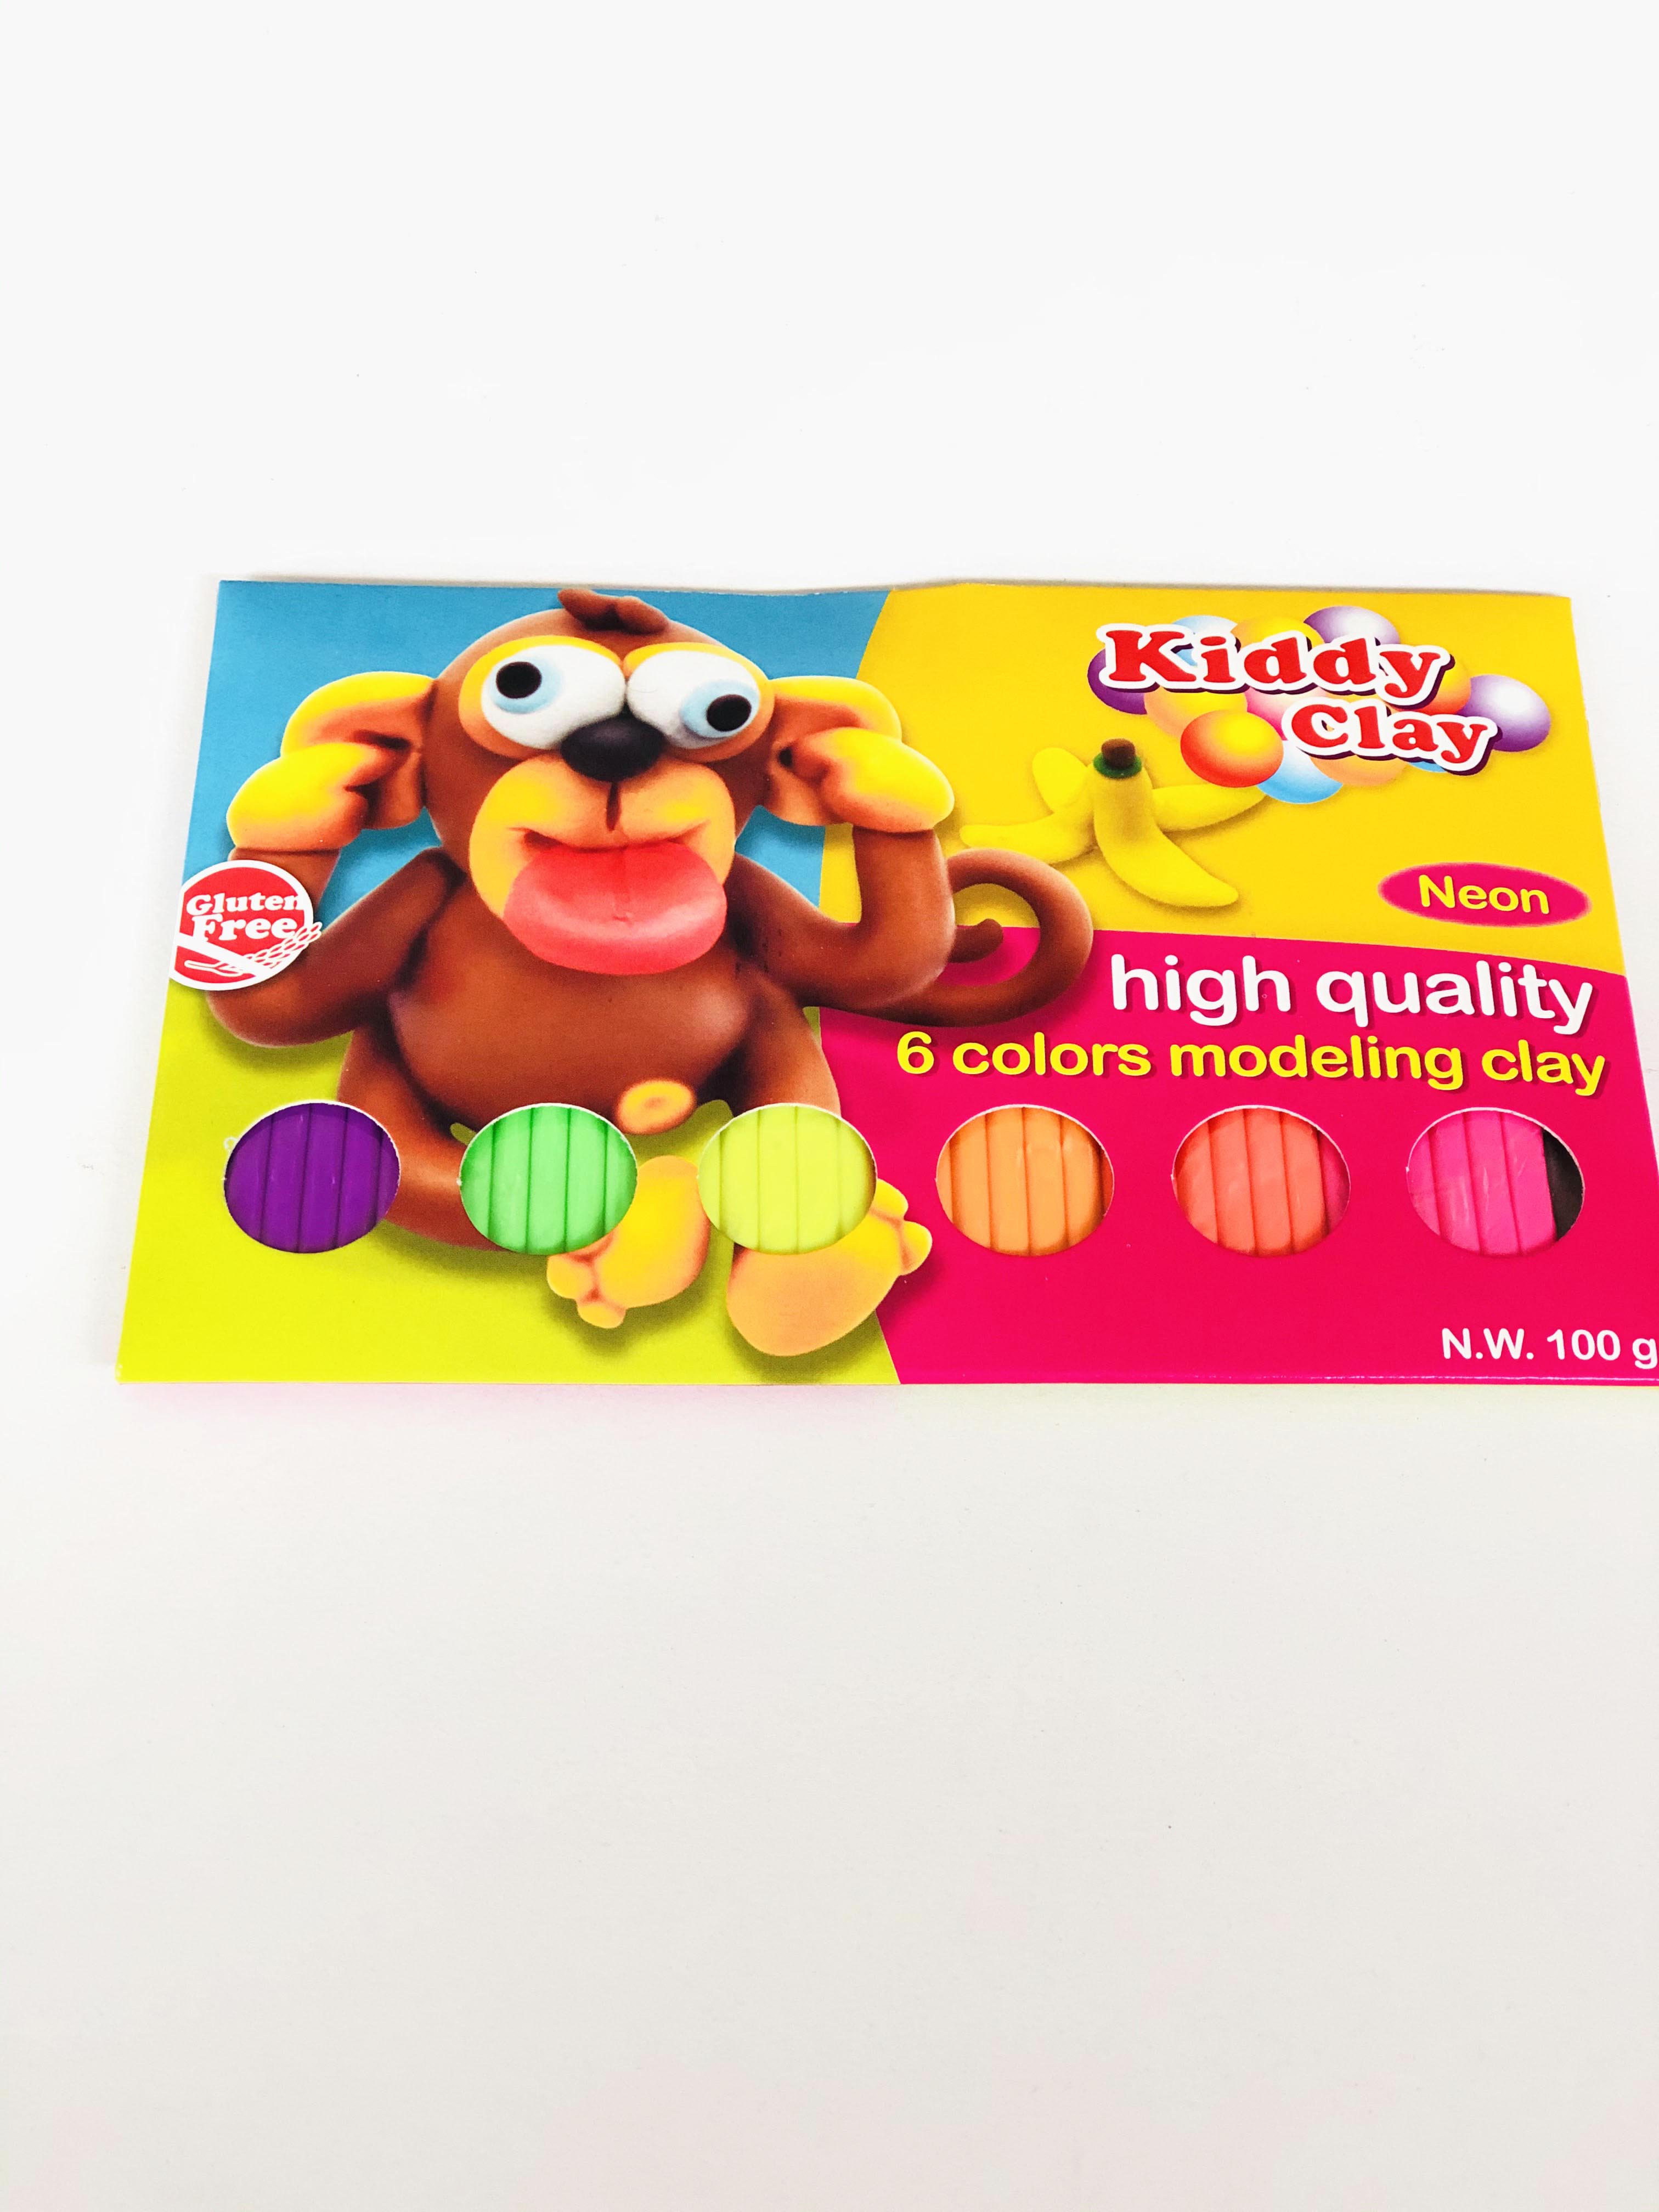 Kiddy Clay High Quality 6 colors modeling clay 10153872